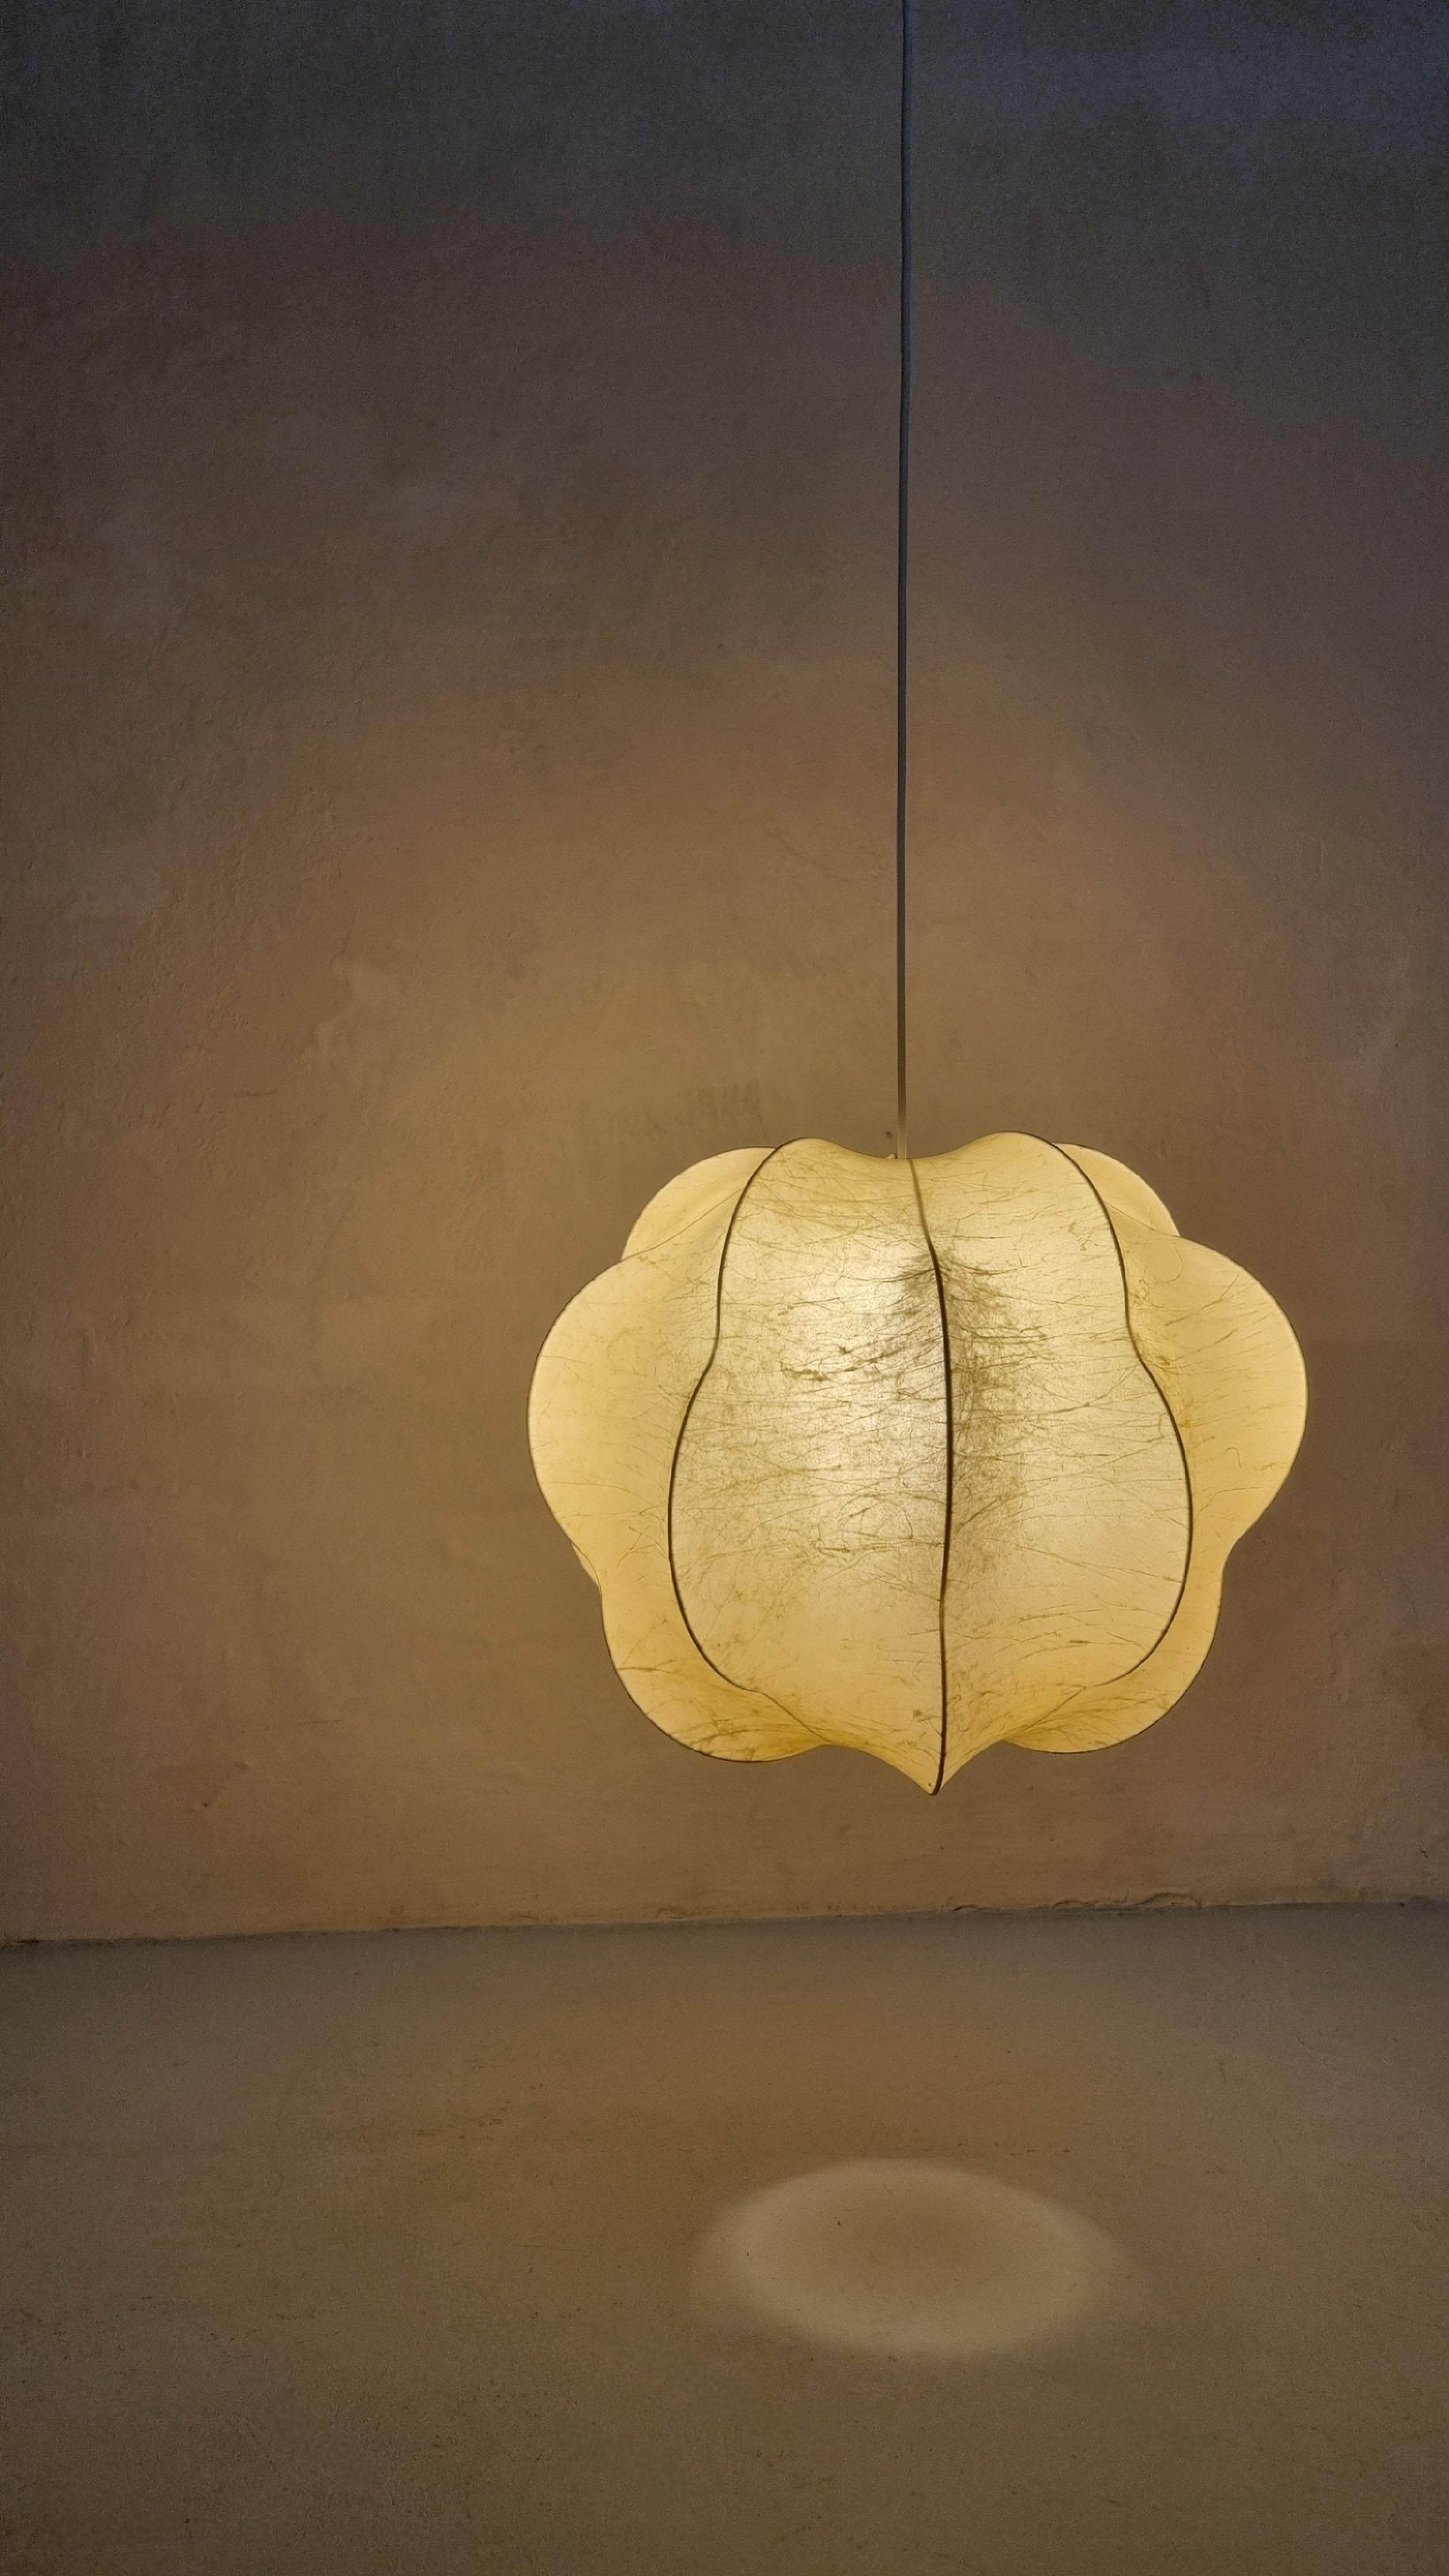 Cocoon suspension lamp, 1960s.
White coated internal steel structure, sprayed with special cocoon resin.
Excellent condition.
In the style of the Nuvola model by Tobia Scarpa.
For all the iconic items of Italian design follow our gallery SECONDA